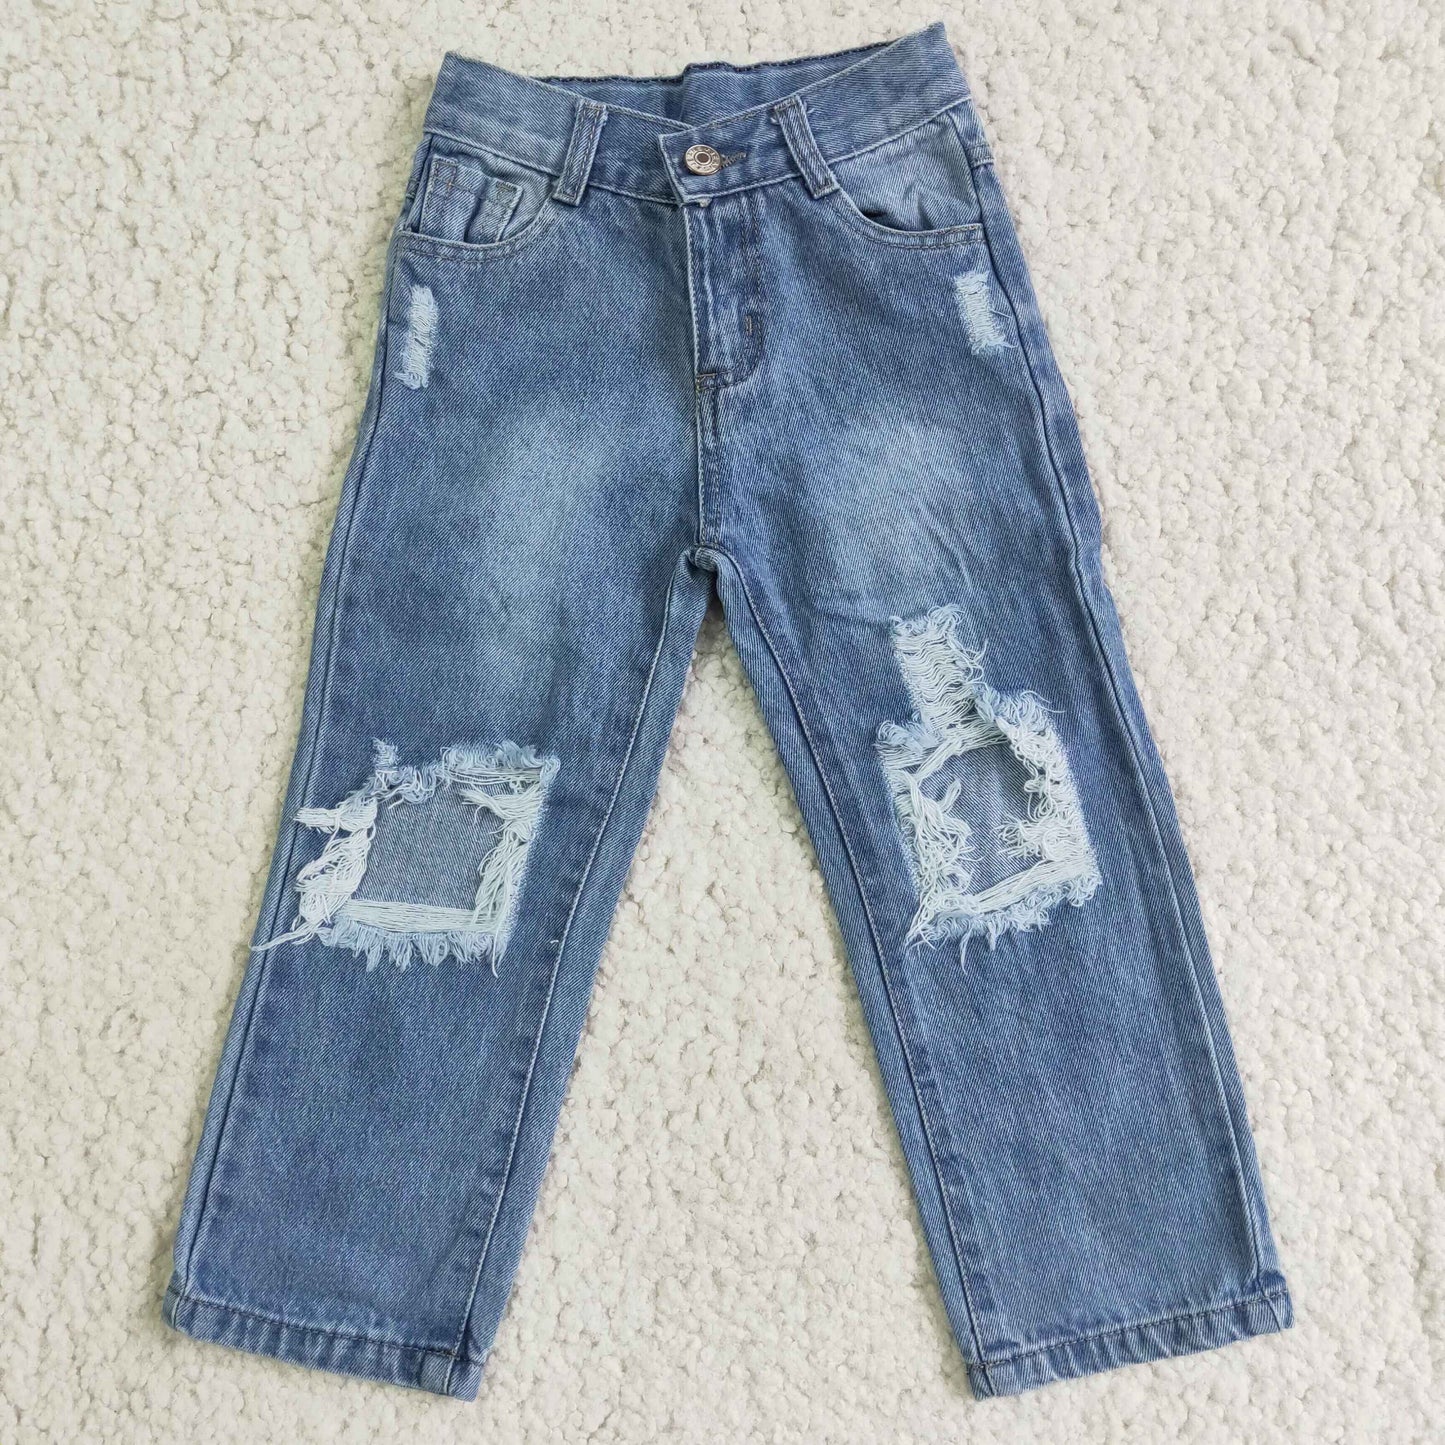 light blue ripped jeans kids clothing